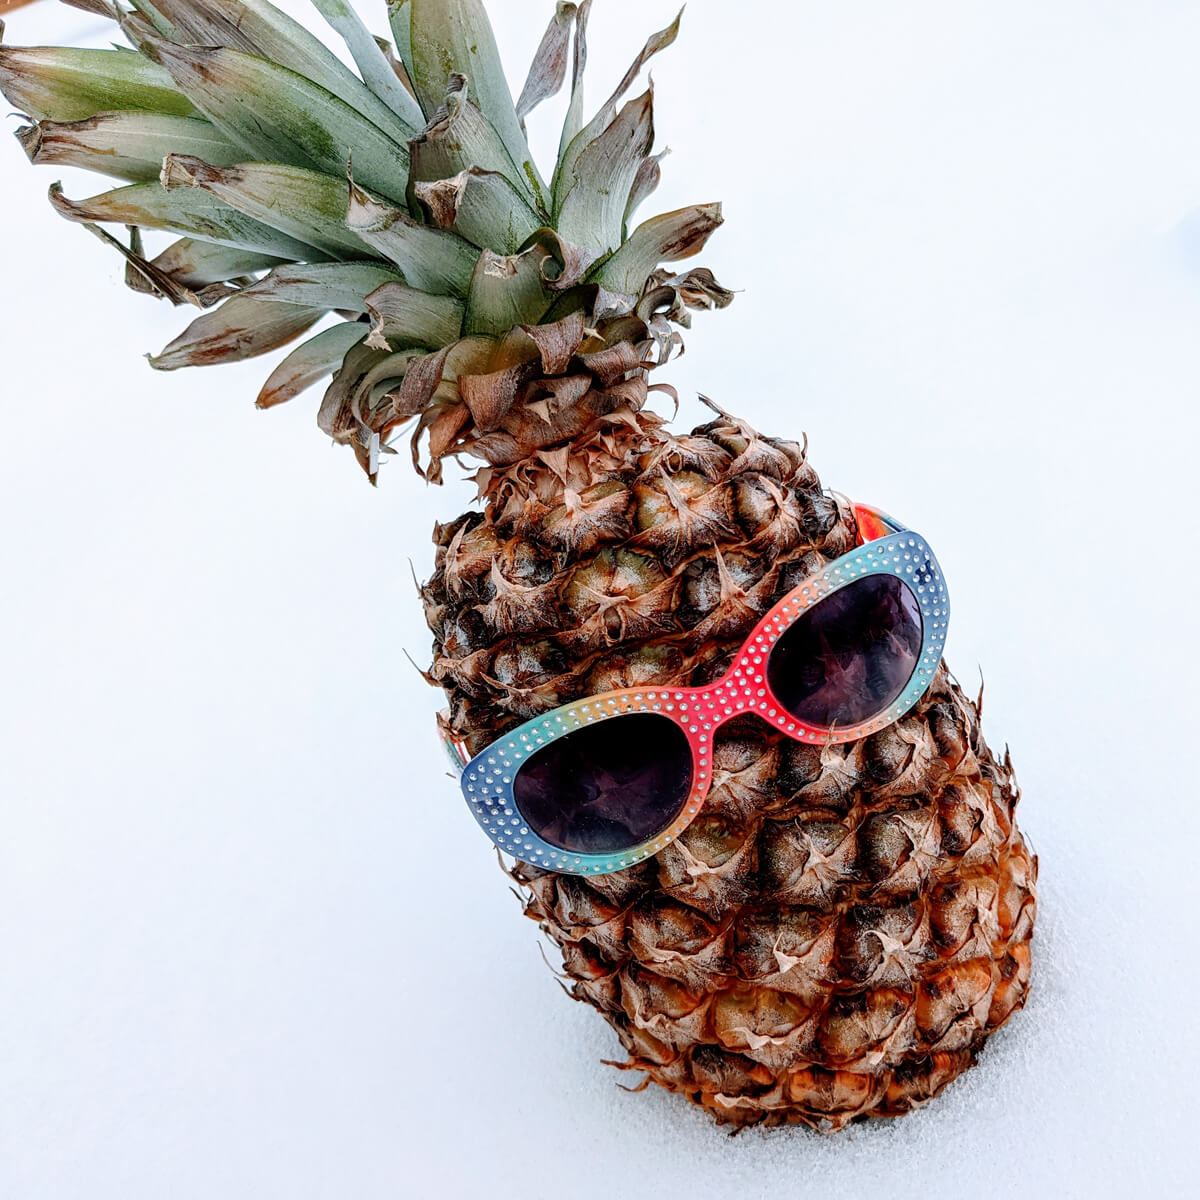 Pineapple in the snow wearing sunglasses - ripe pineapple!